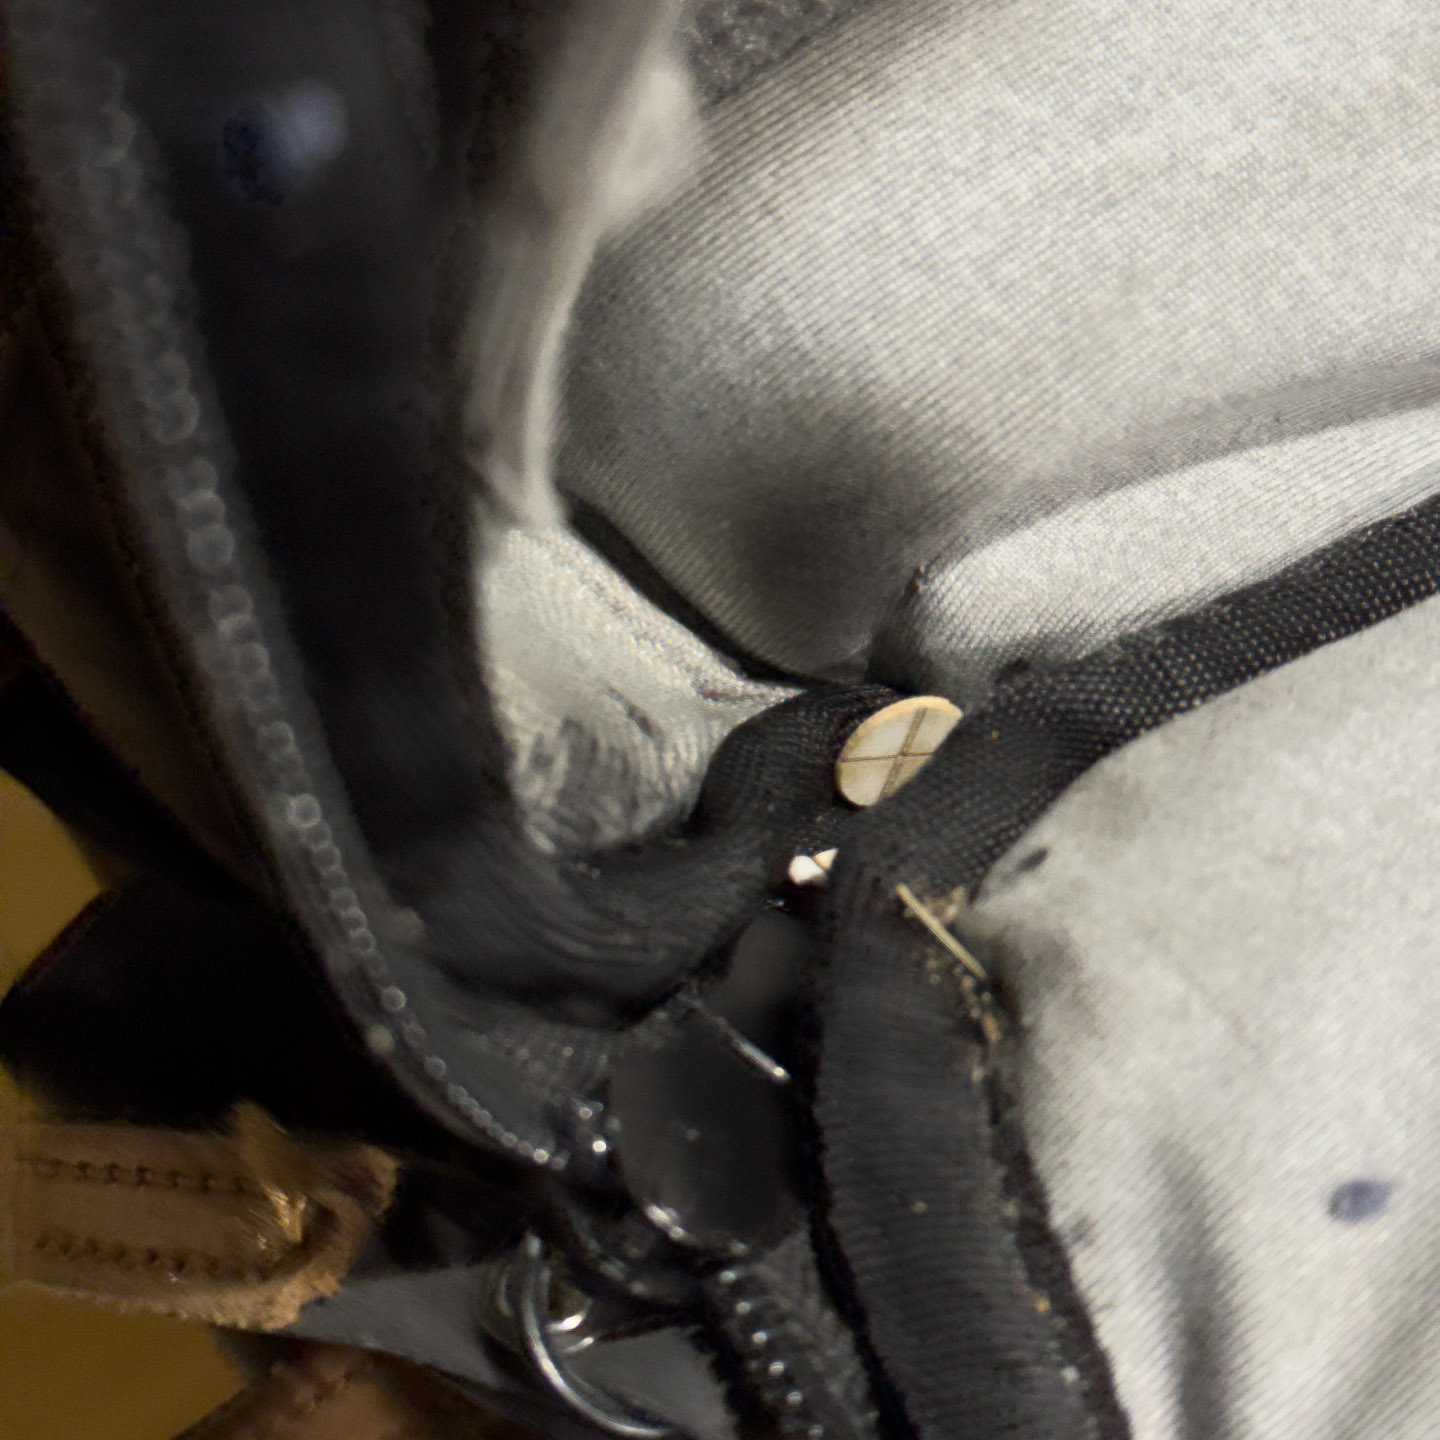 Small paper axle hiding in seam of backpack